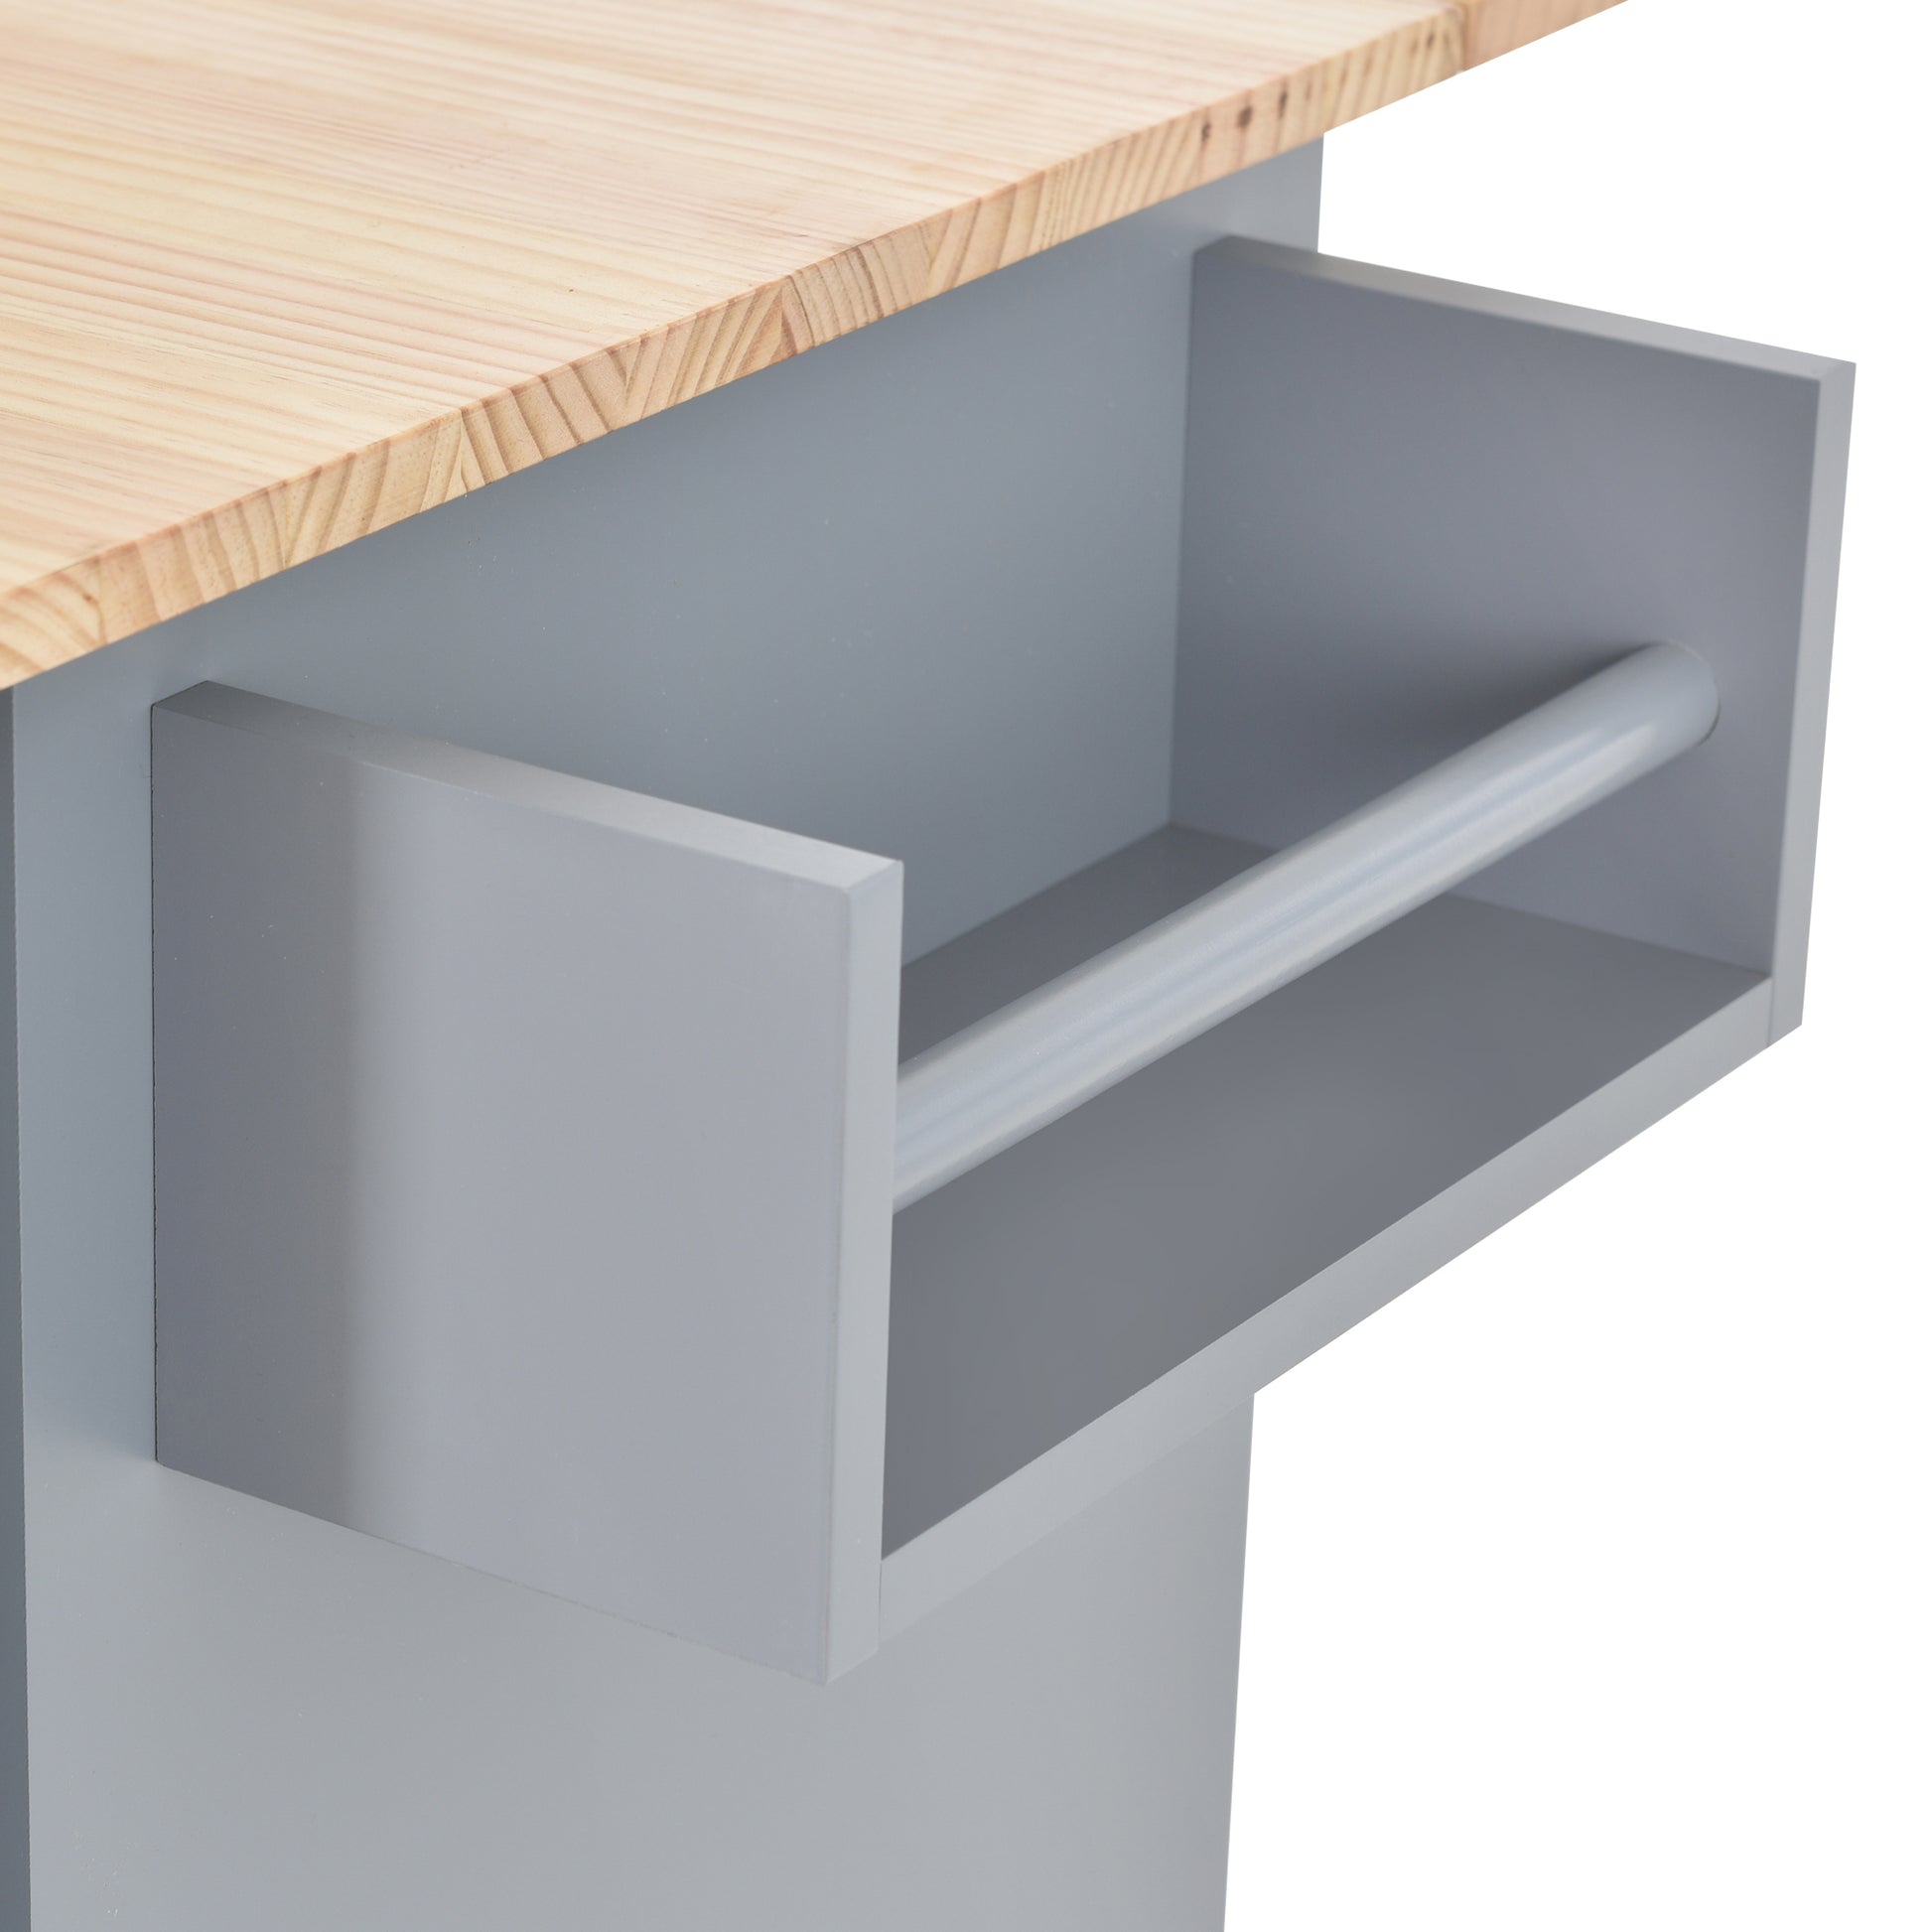 Rolling Mobile Kitchen Island with Solid Wood Top and blue+grey-mdf